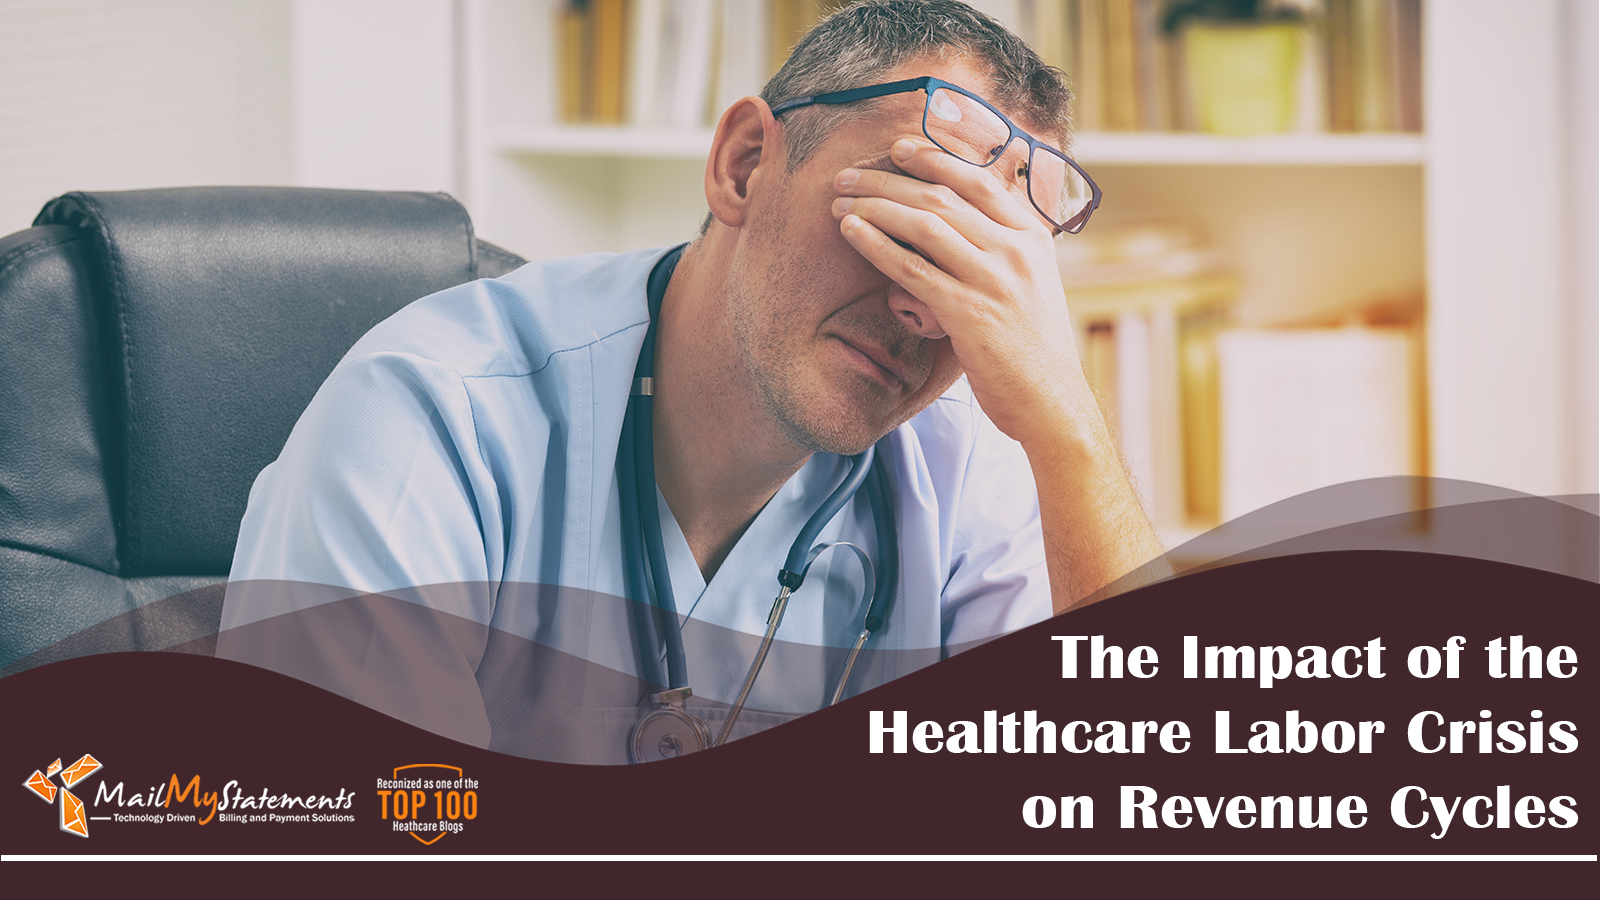 The Impact of the Healthcare Labor Crisis on Revenue Cycles